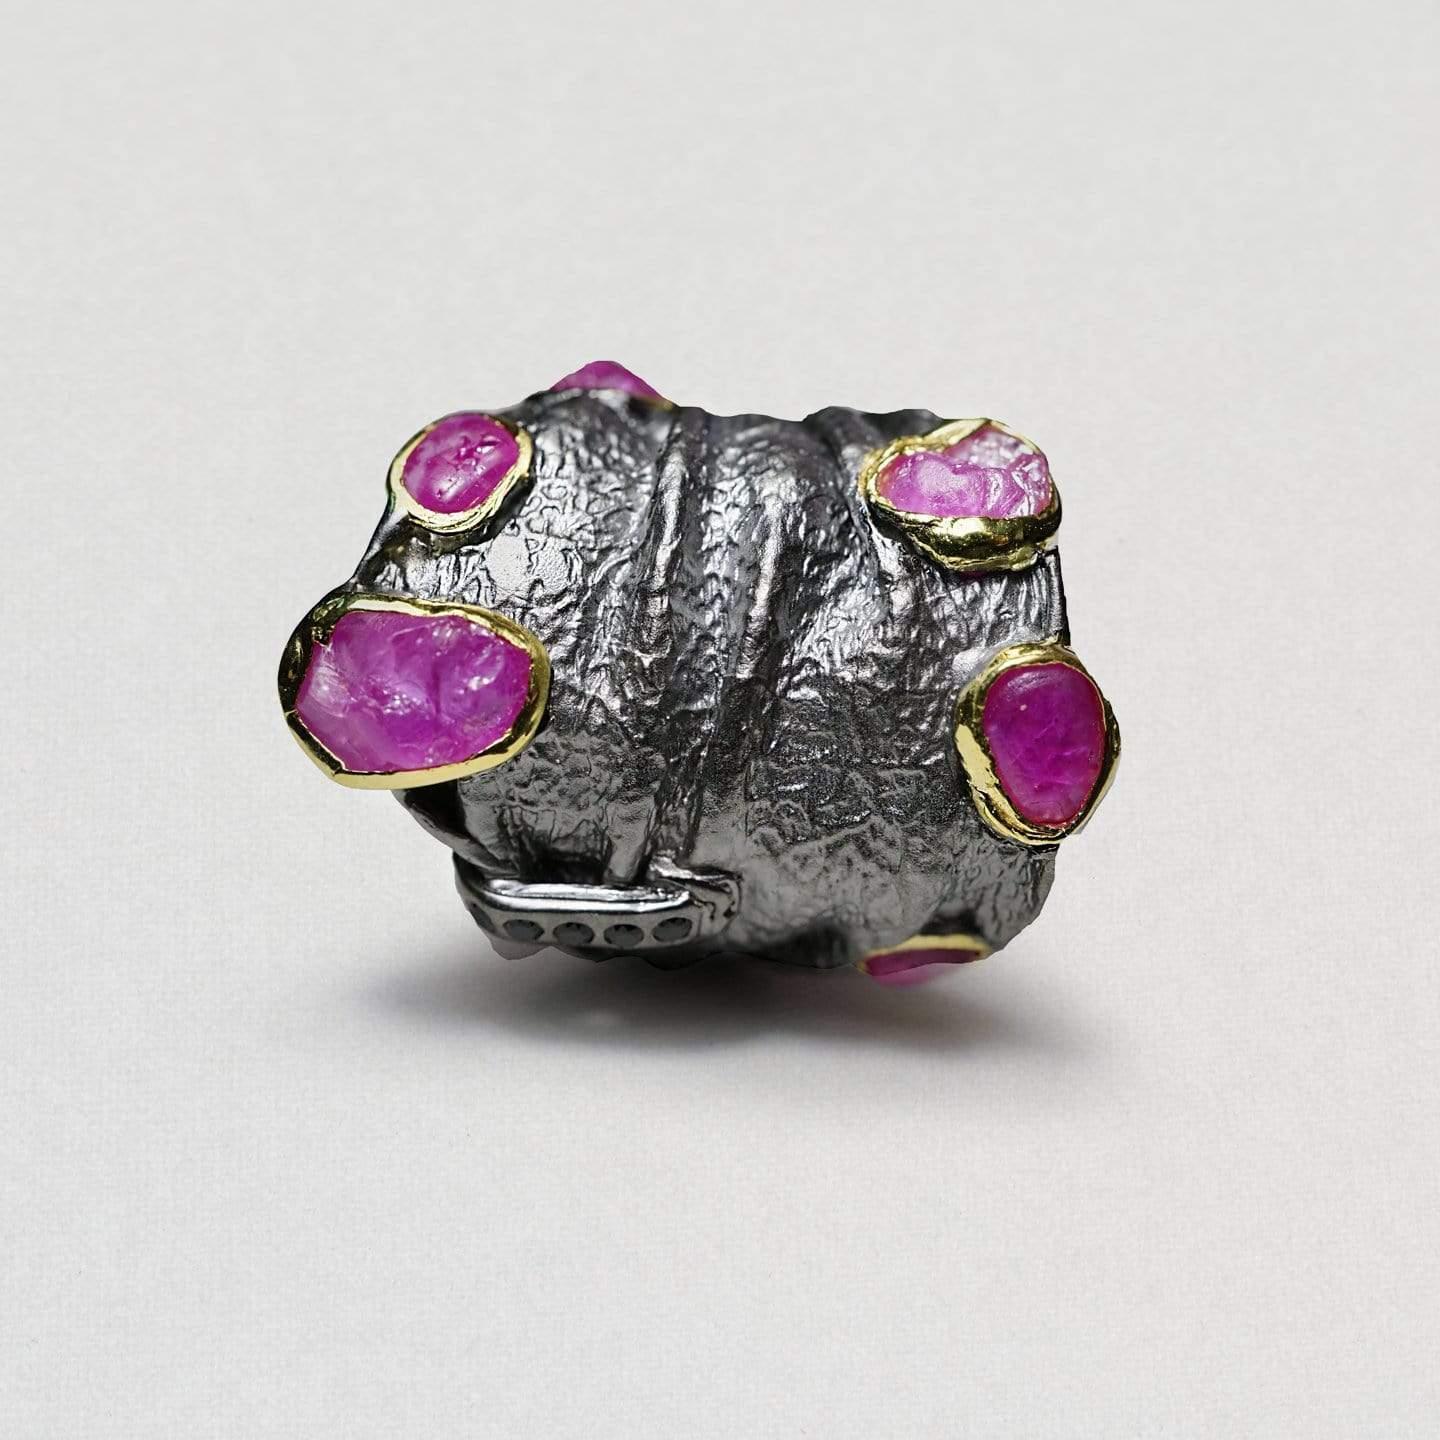 Handmade 925 Sterling Silver Almaith Ruby Ring with Gold and Black Rhodium In New Condition For Sale In Riverside, CA